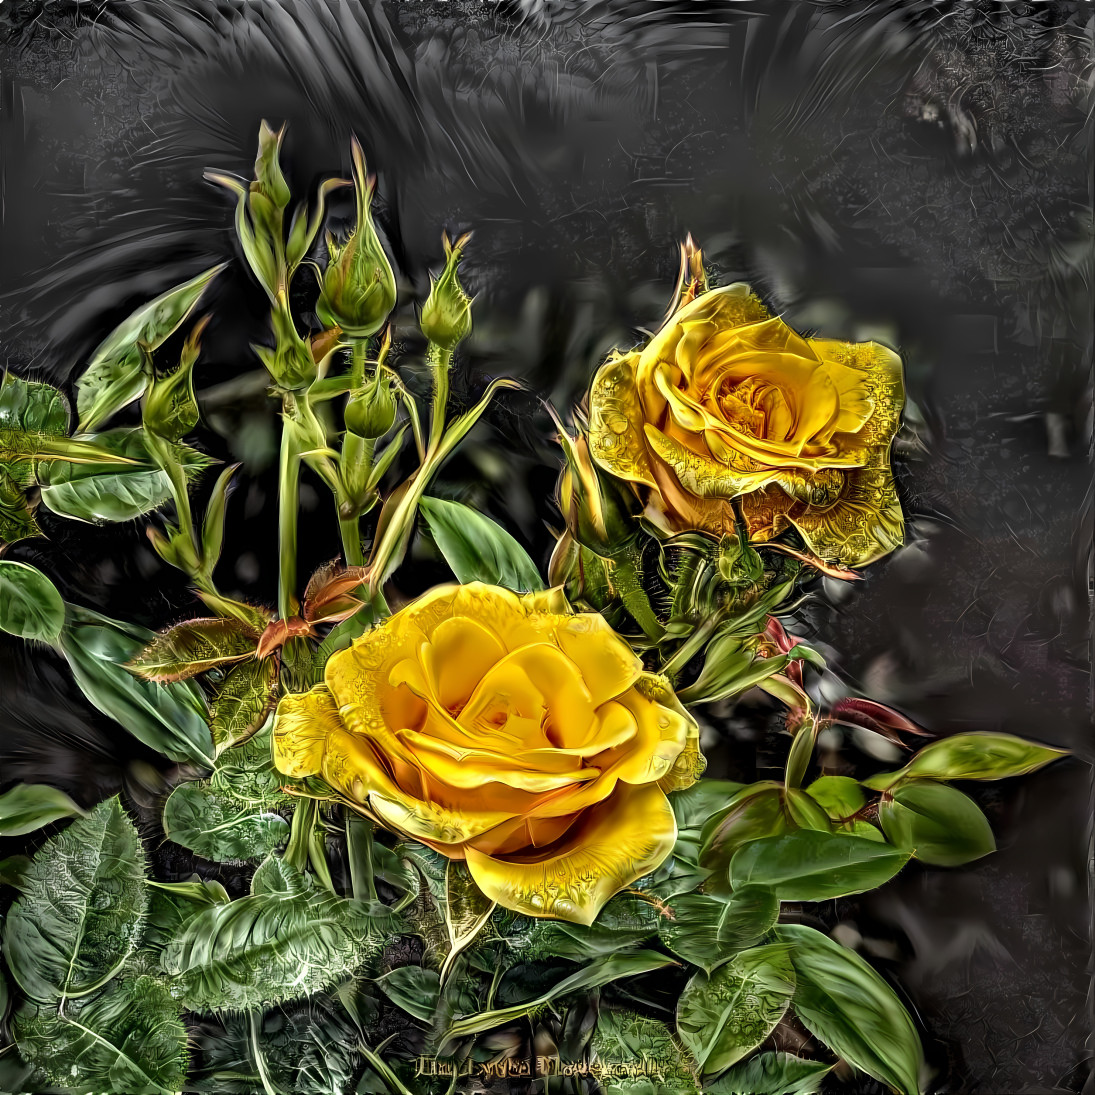 beuty of yellow rose 